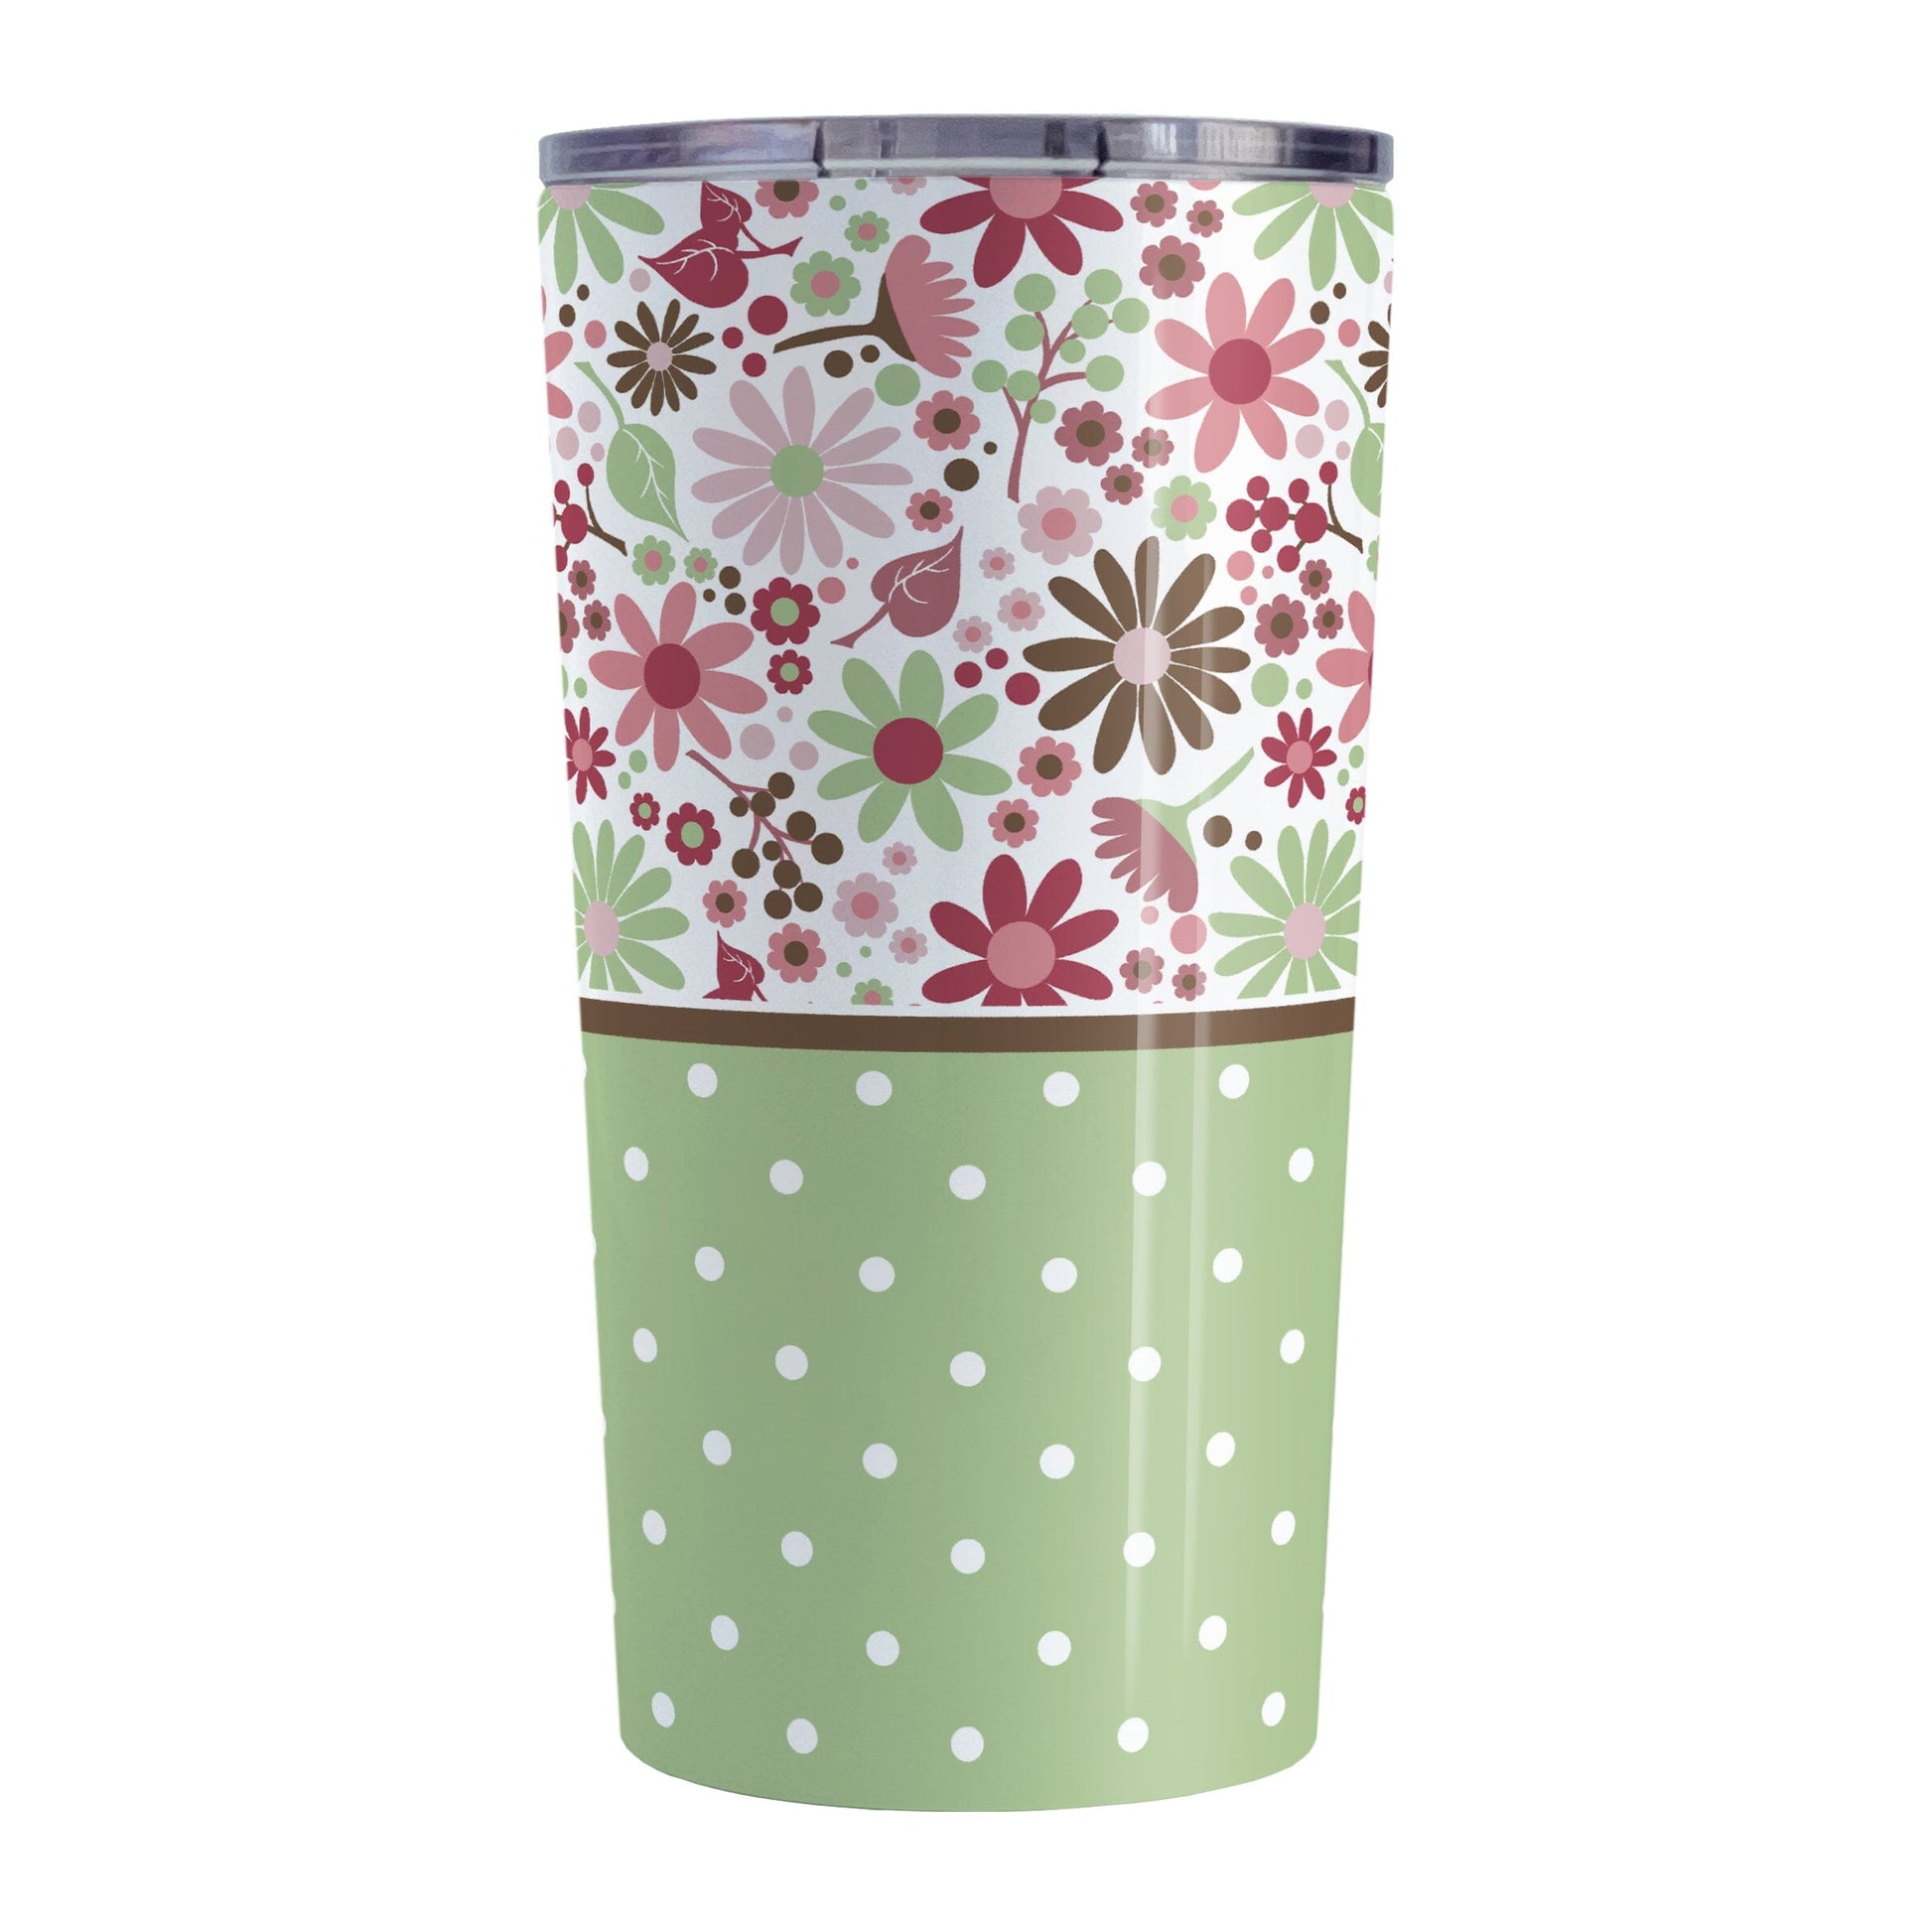 Berry Green Summer Flowers Polka Dot Tumbler Cup (20oz) at Amy's Coffee Mugs. A stainless steel tumbler cup designed with a pretty floral pattern in a gorgeous berry pink color palette with sage green and brown along the top, and a sage green polka dot pattern along the bottom. These patterns wrap around the cup.